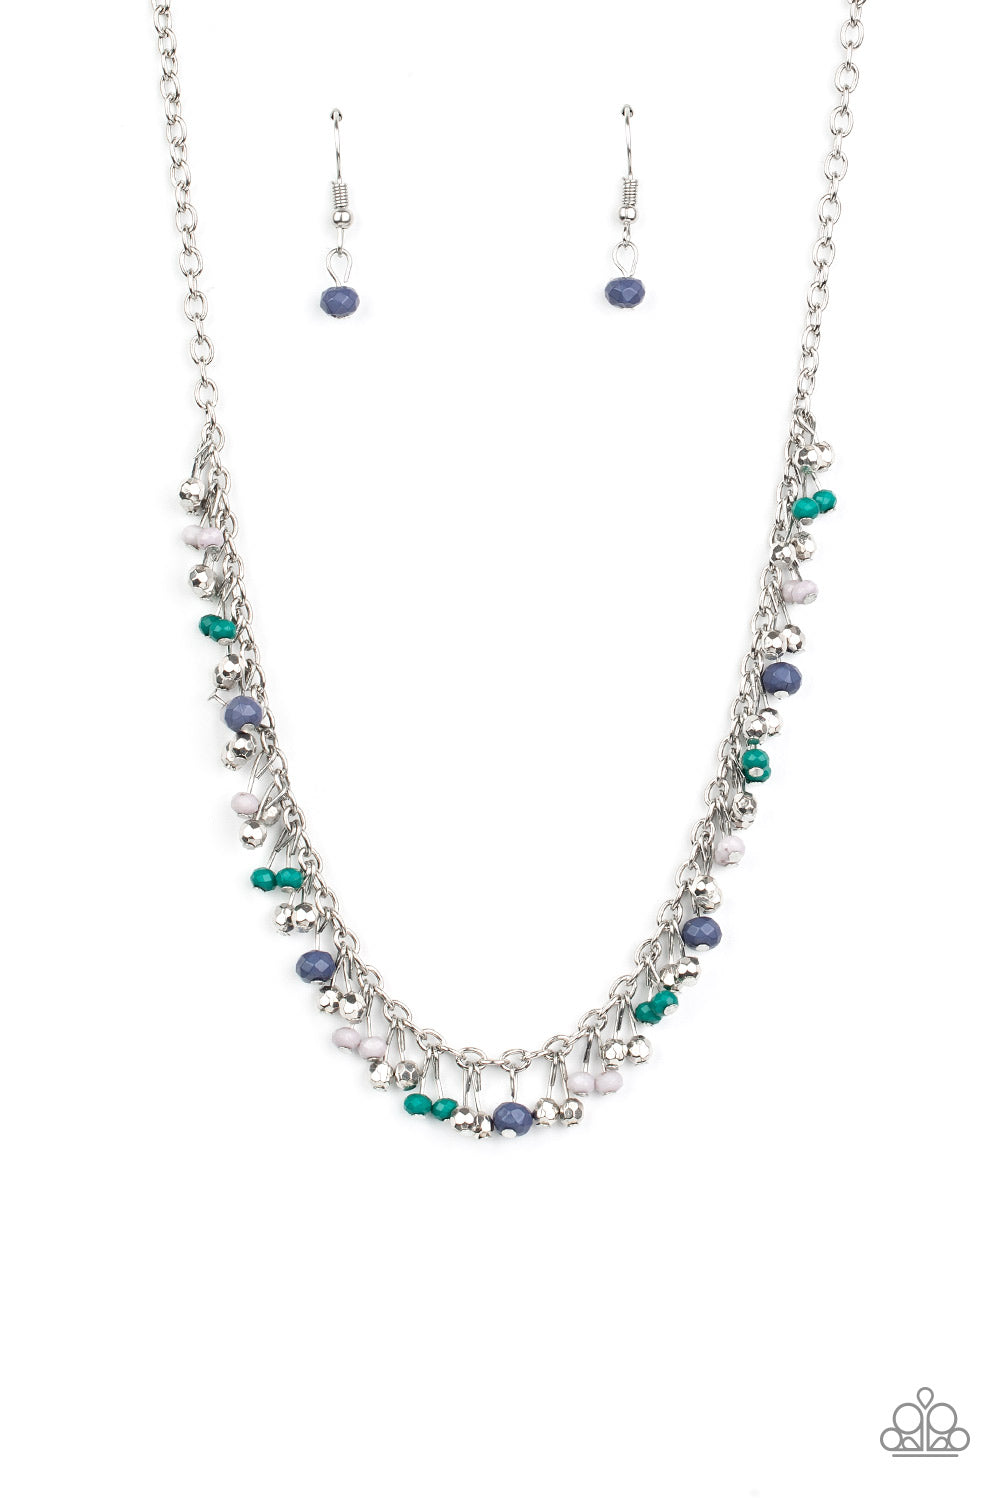 Sailing The Seven Seas - Multi Blue and Green Necklace - Paparazzi Accessories